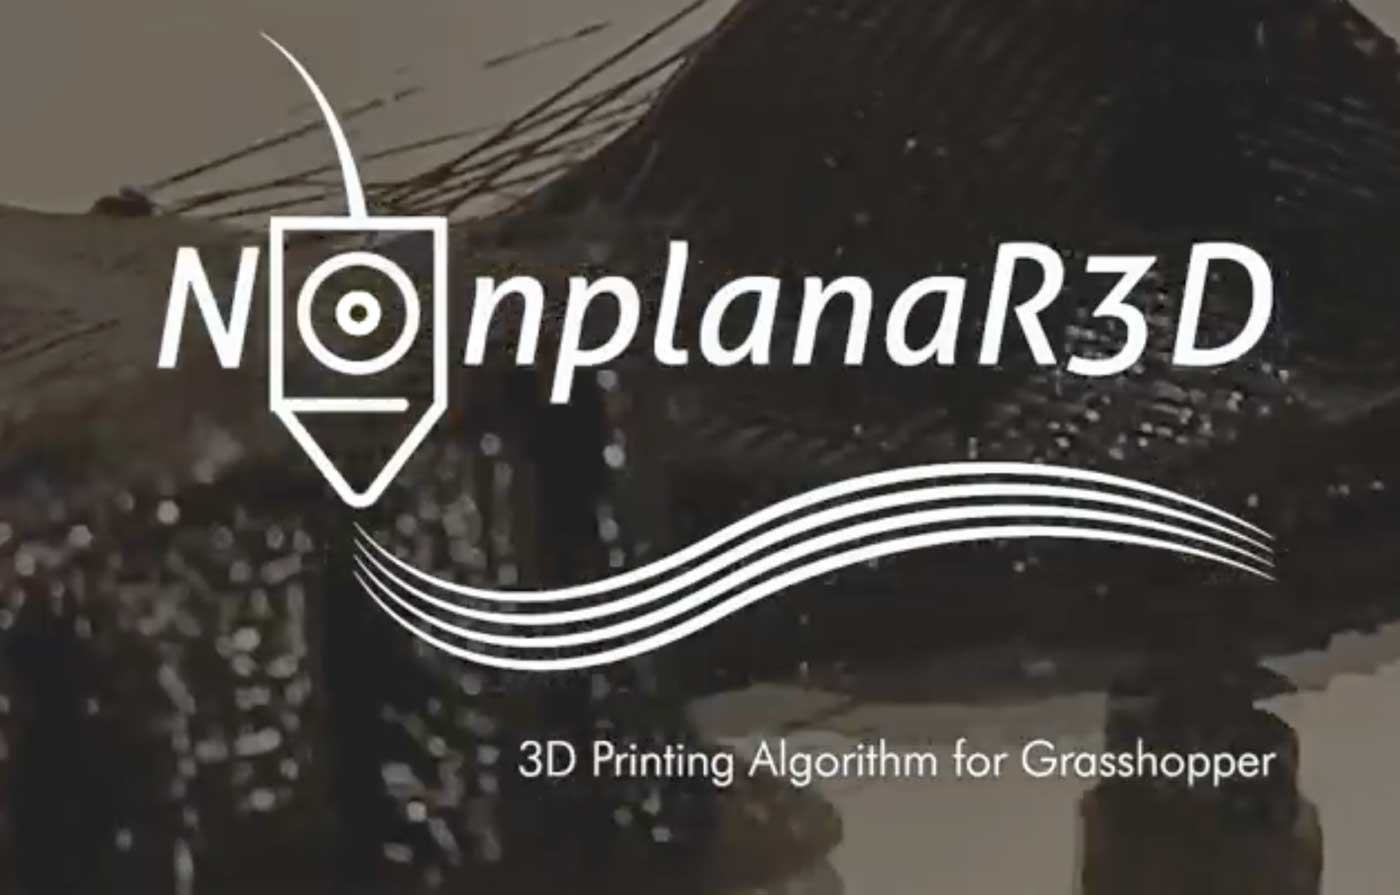 The free tool enables uneven 3D printing